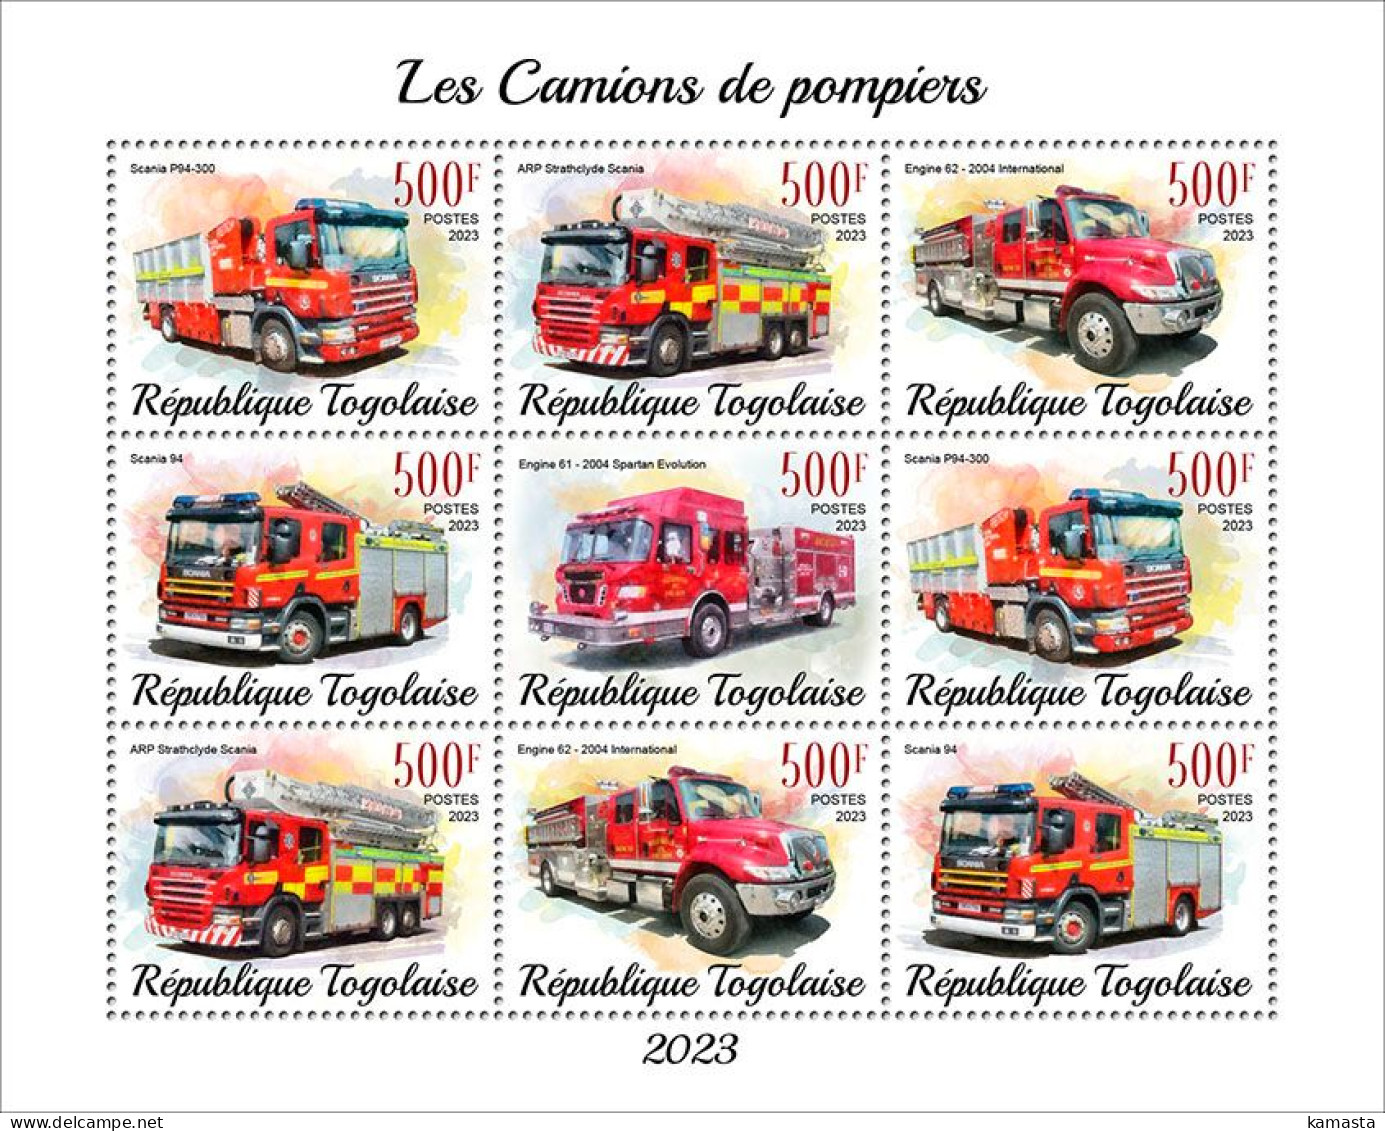 Togo 2023 Fire Trucks. (249f25) OFFICIAL ISSUE - LKW